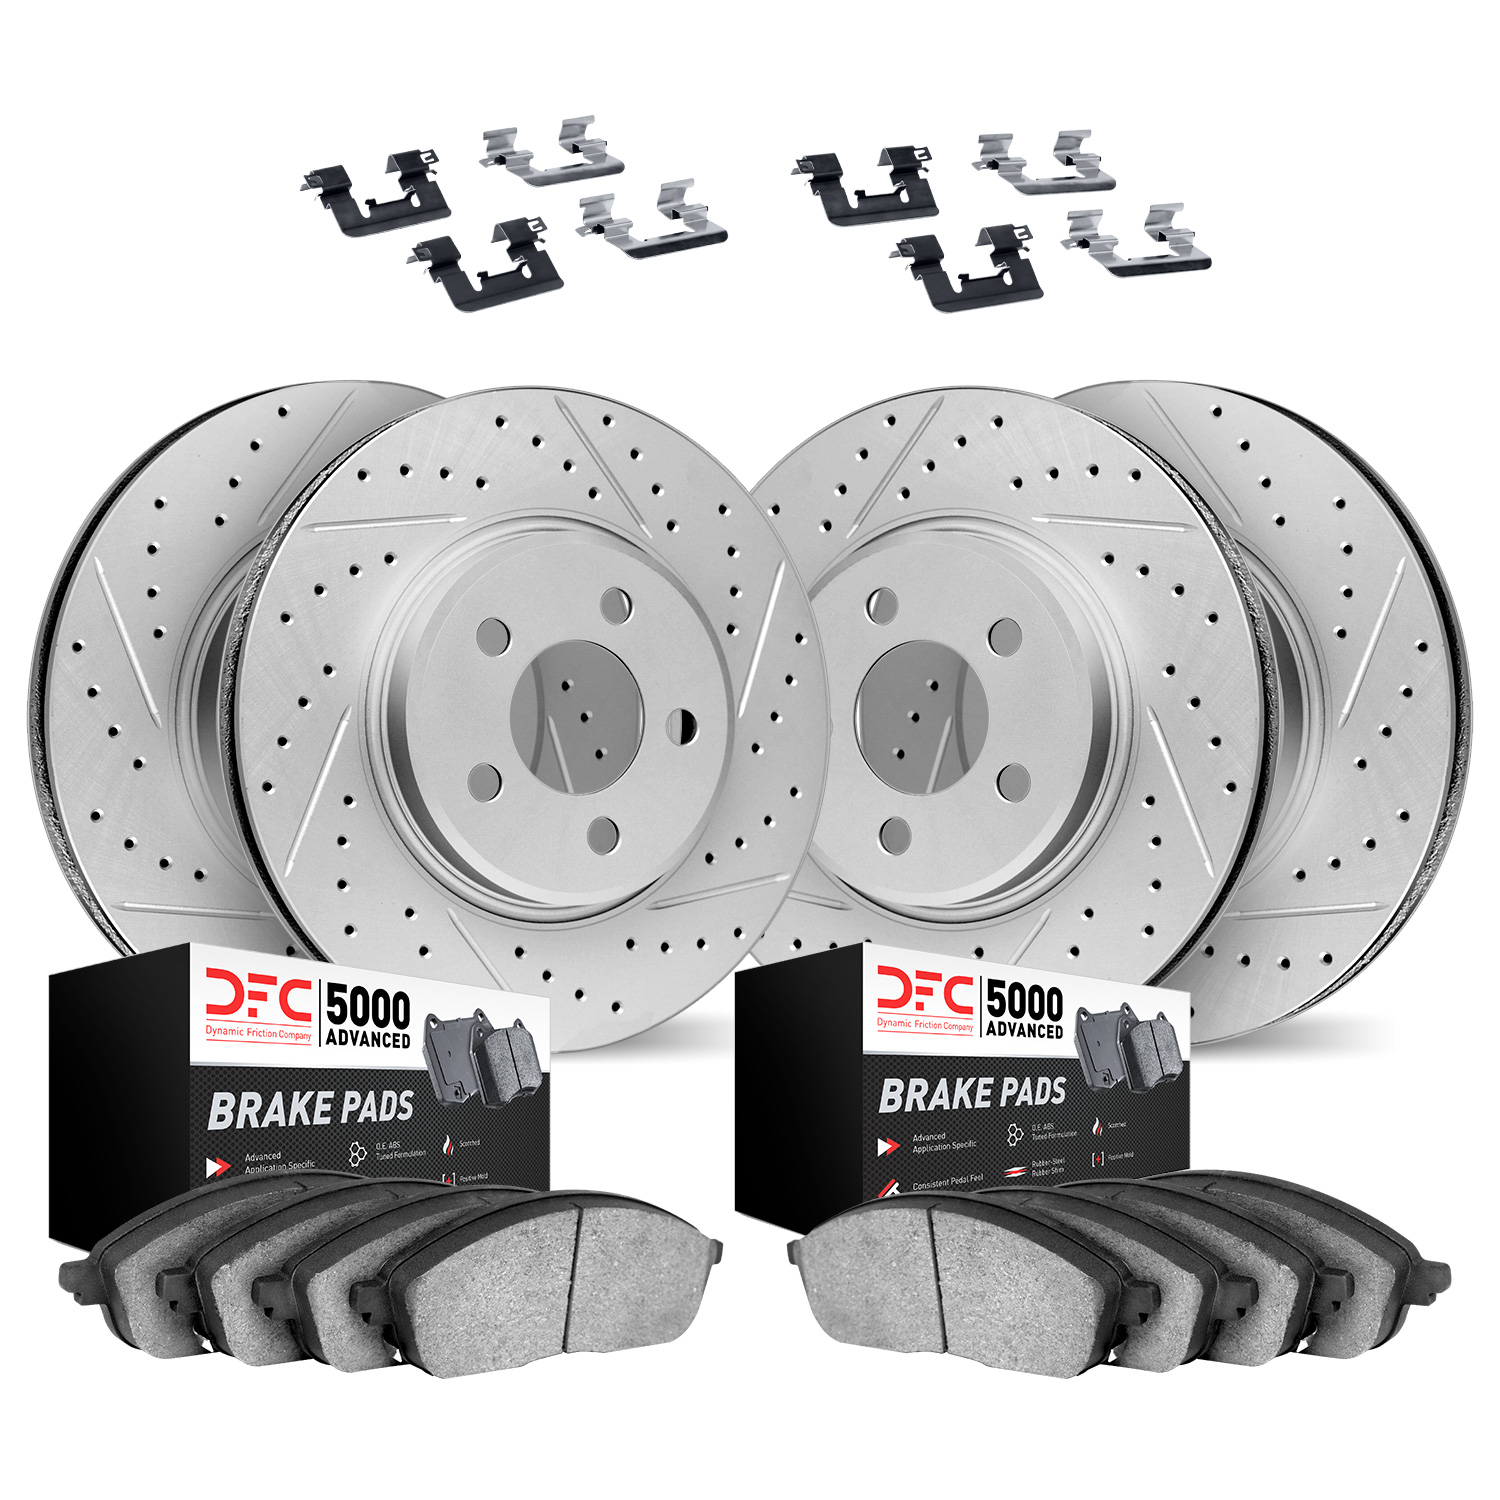 2514-31024 Geoperformance Drilled/Slotted Rotors w/5000 Advanced Brake Pads Kit & Hardware, 2013-2020 BMW, Position: Front and R